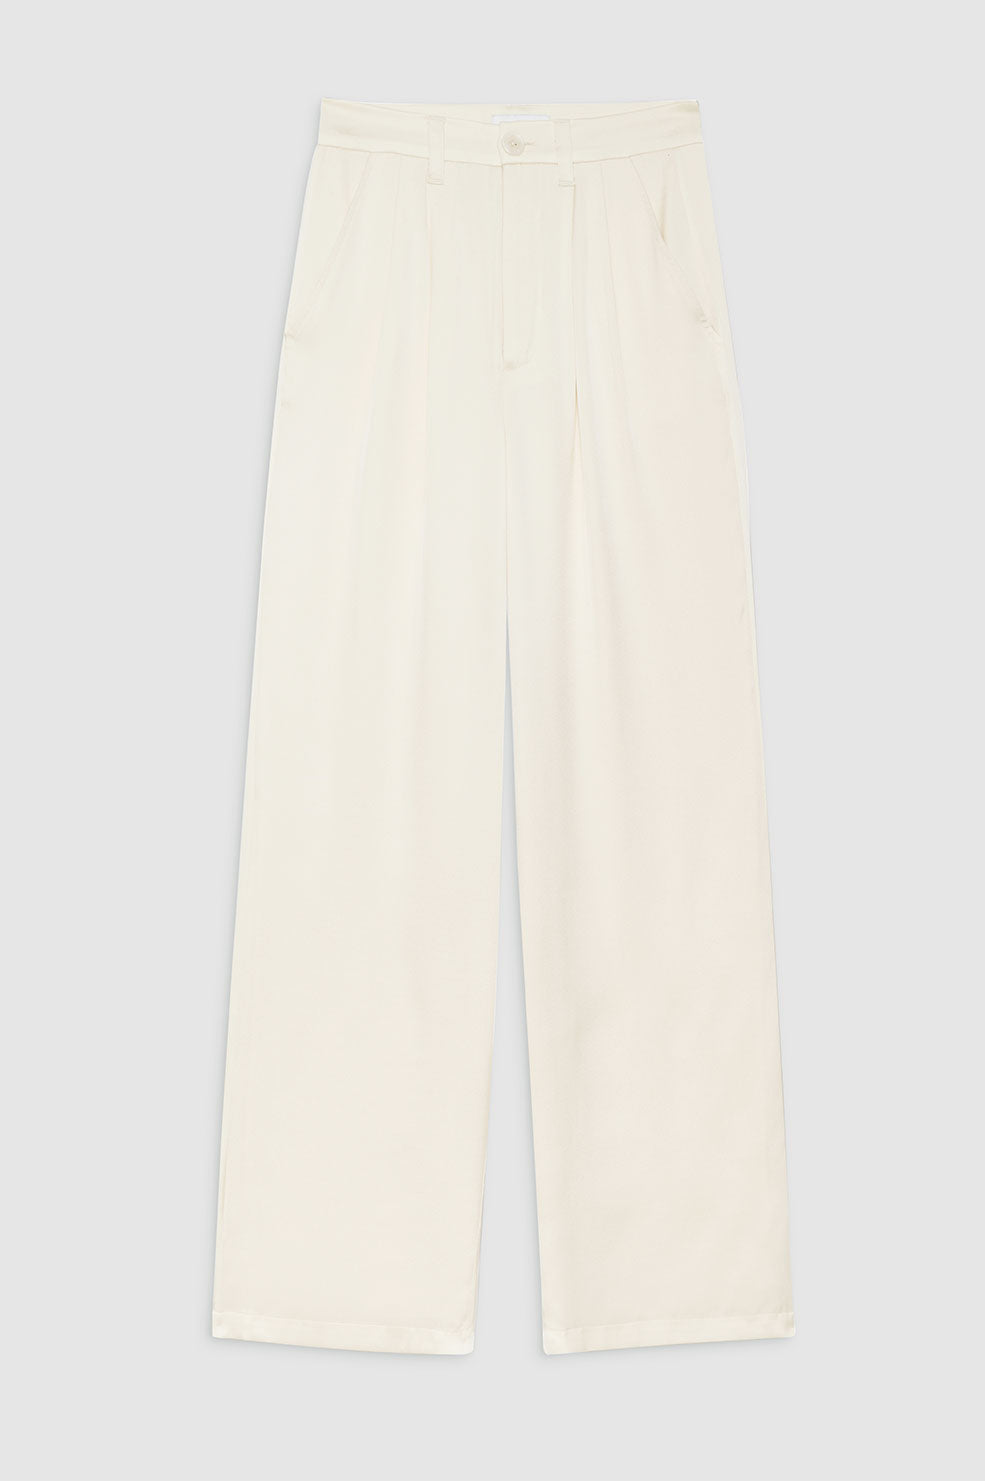 ANINE BING Carrie Pant - Oyster - Front View